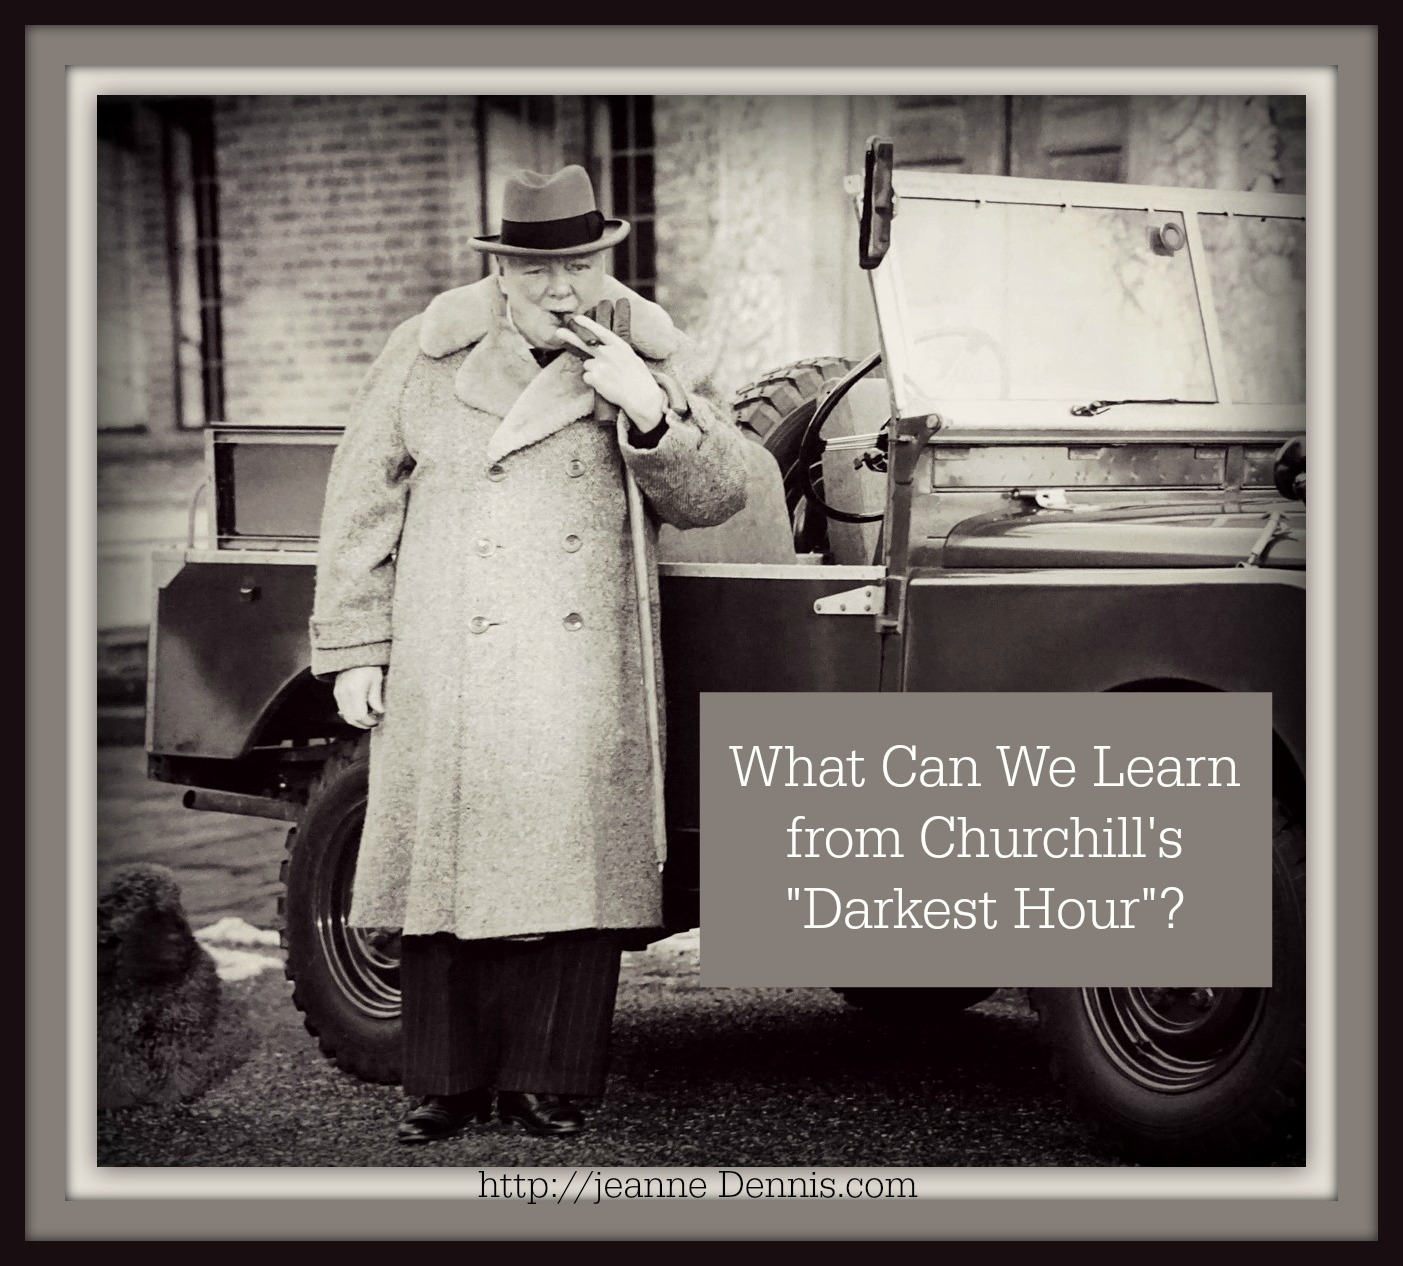 What Can We Learn from Churchill's "Darkest Hour"?